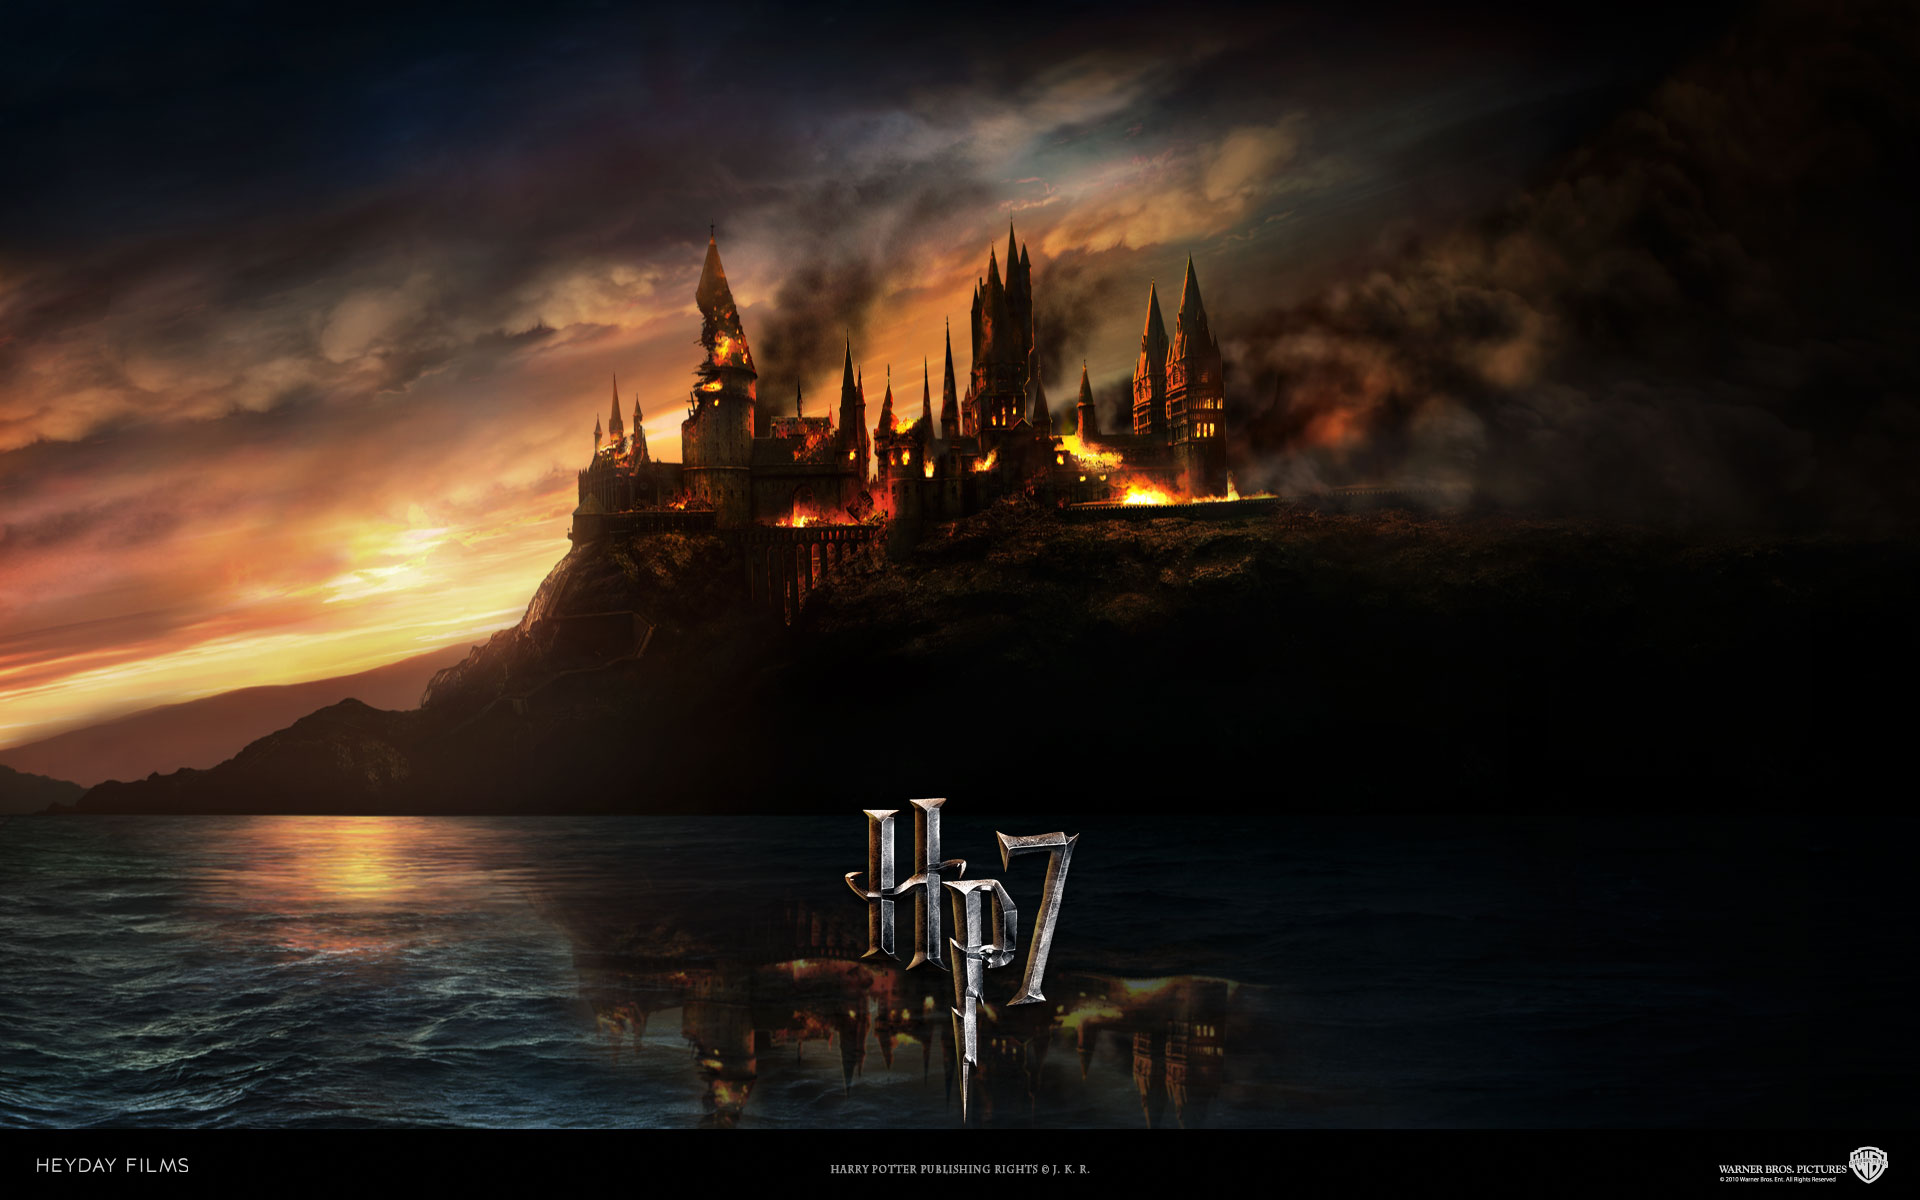 Harry Potter And The Deathly Hallows Part 2 wallpaper   326934